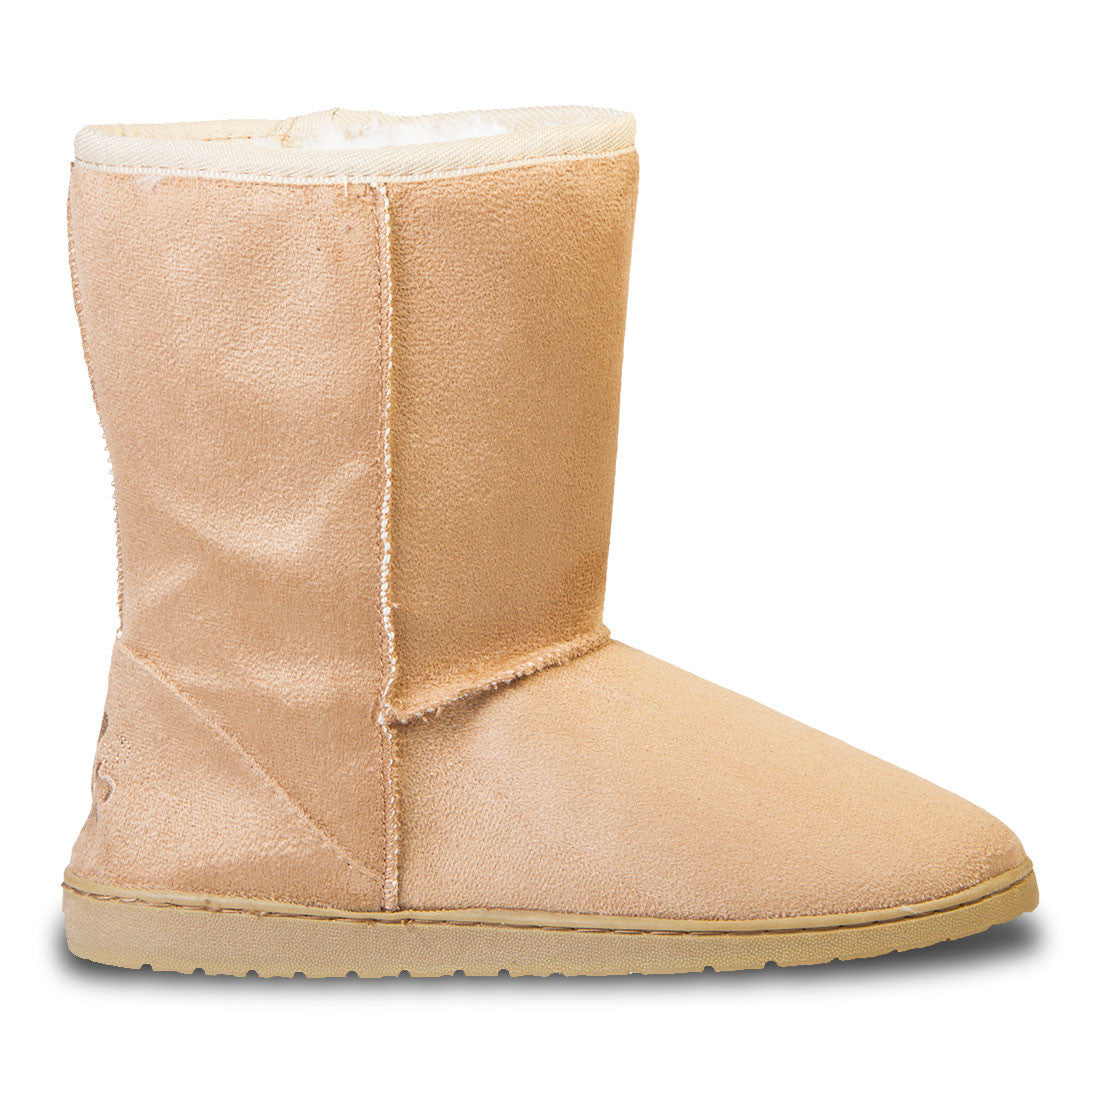 Image of Women's 9-inch Microfiber Boots - Natural